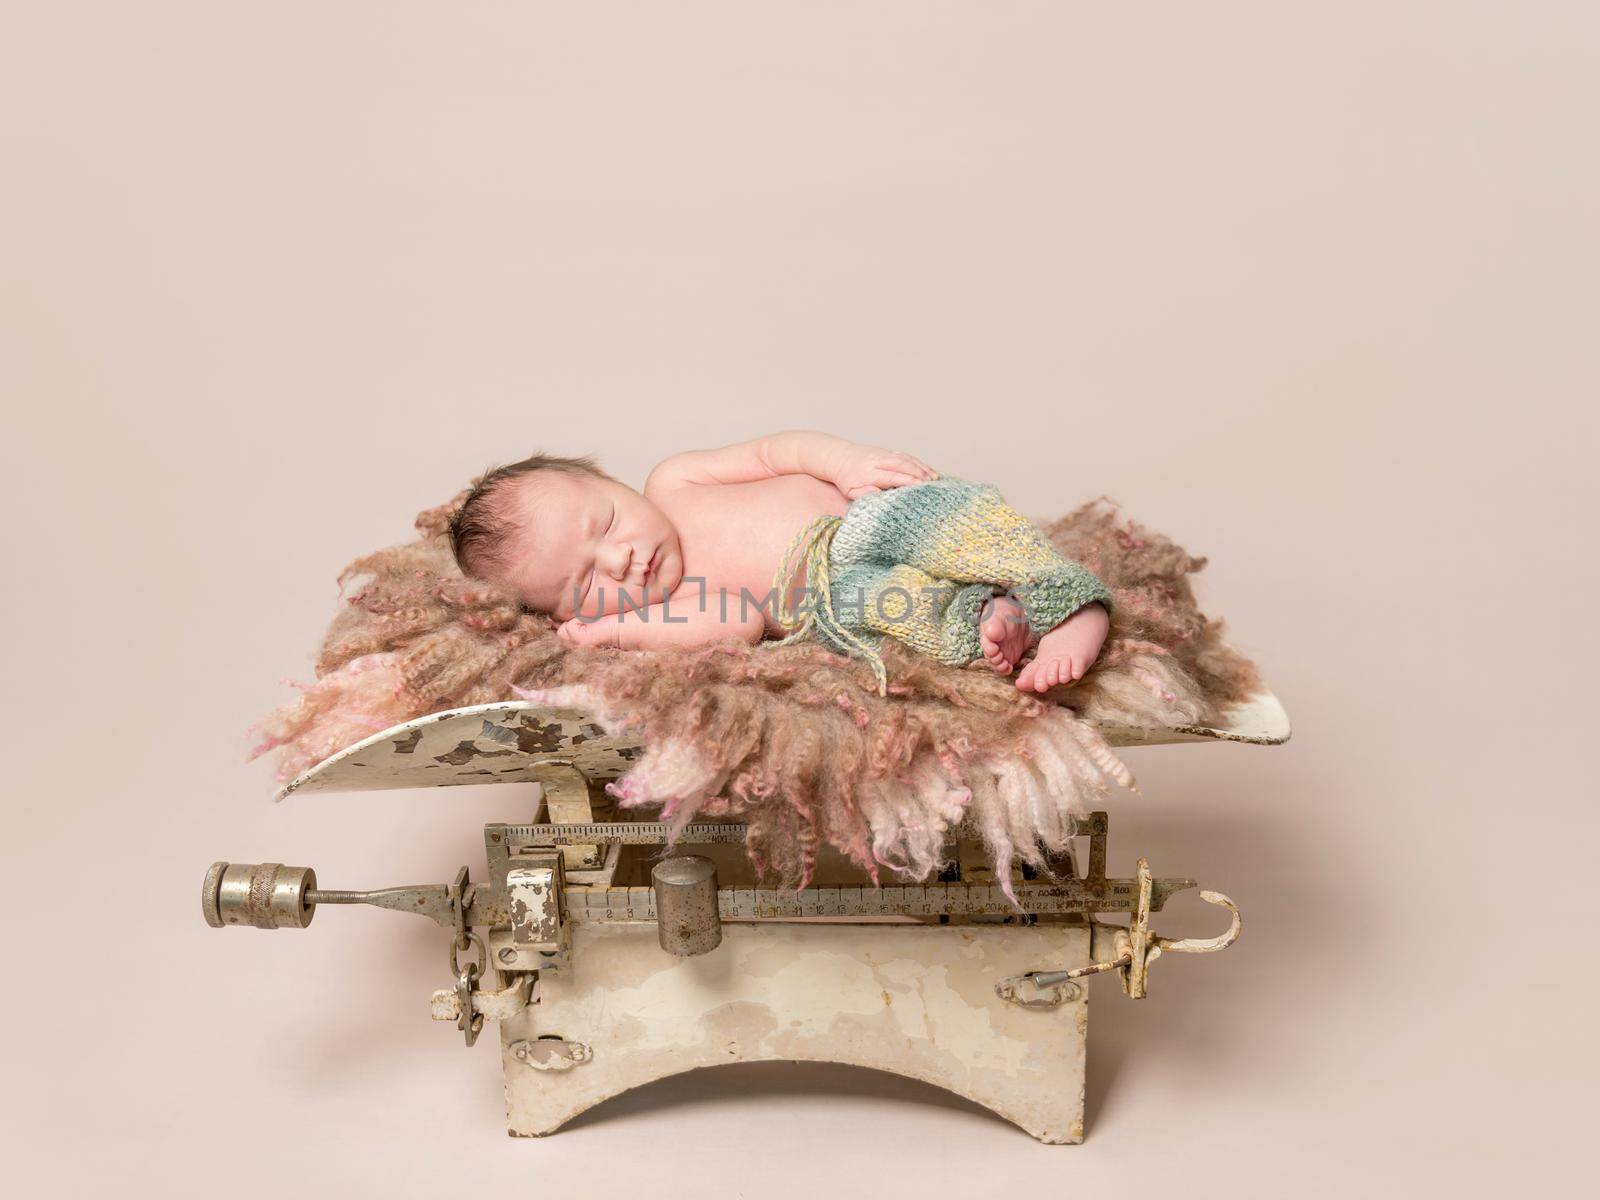 Lovely baby sleeping on old rusty scales by tan4ikk1